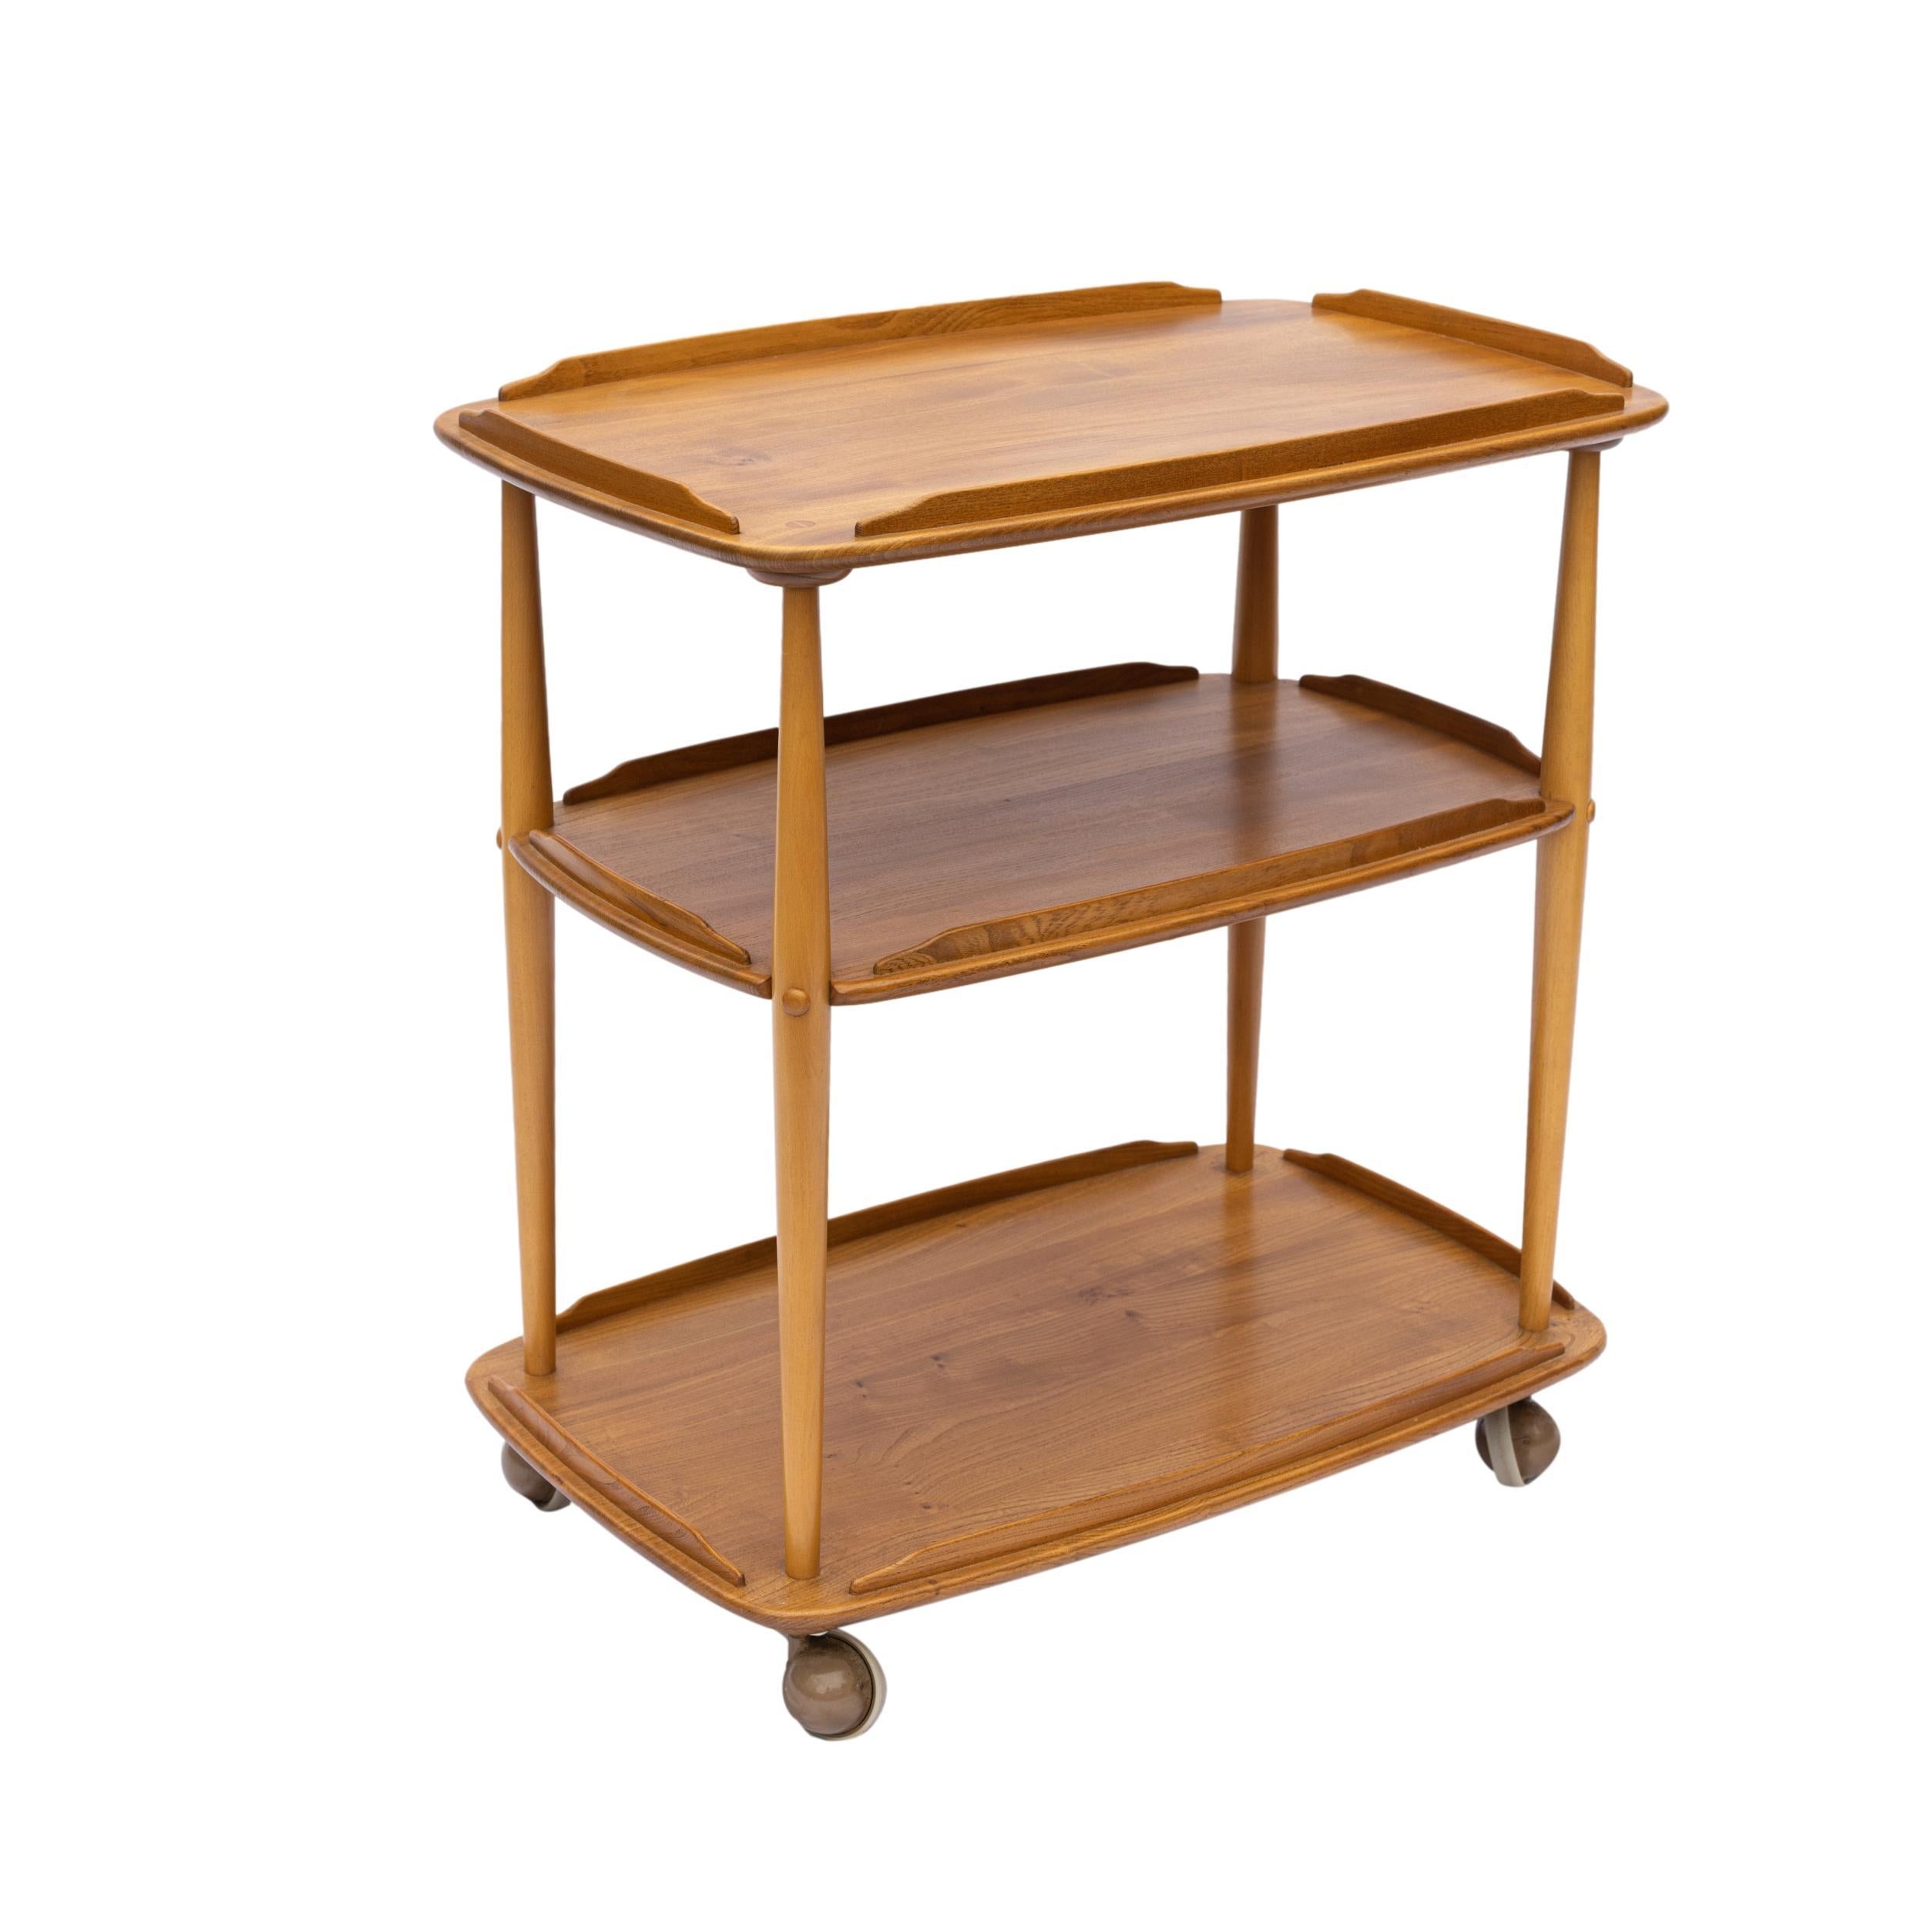 English Mid-Century Modern Ercol Elm and Beech Bar Cart Designed by Lucian Ercolani For Sale